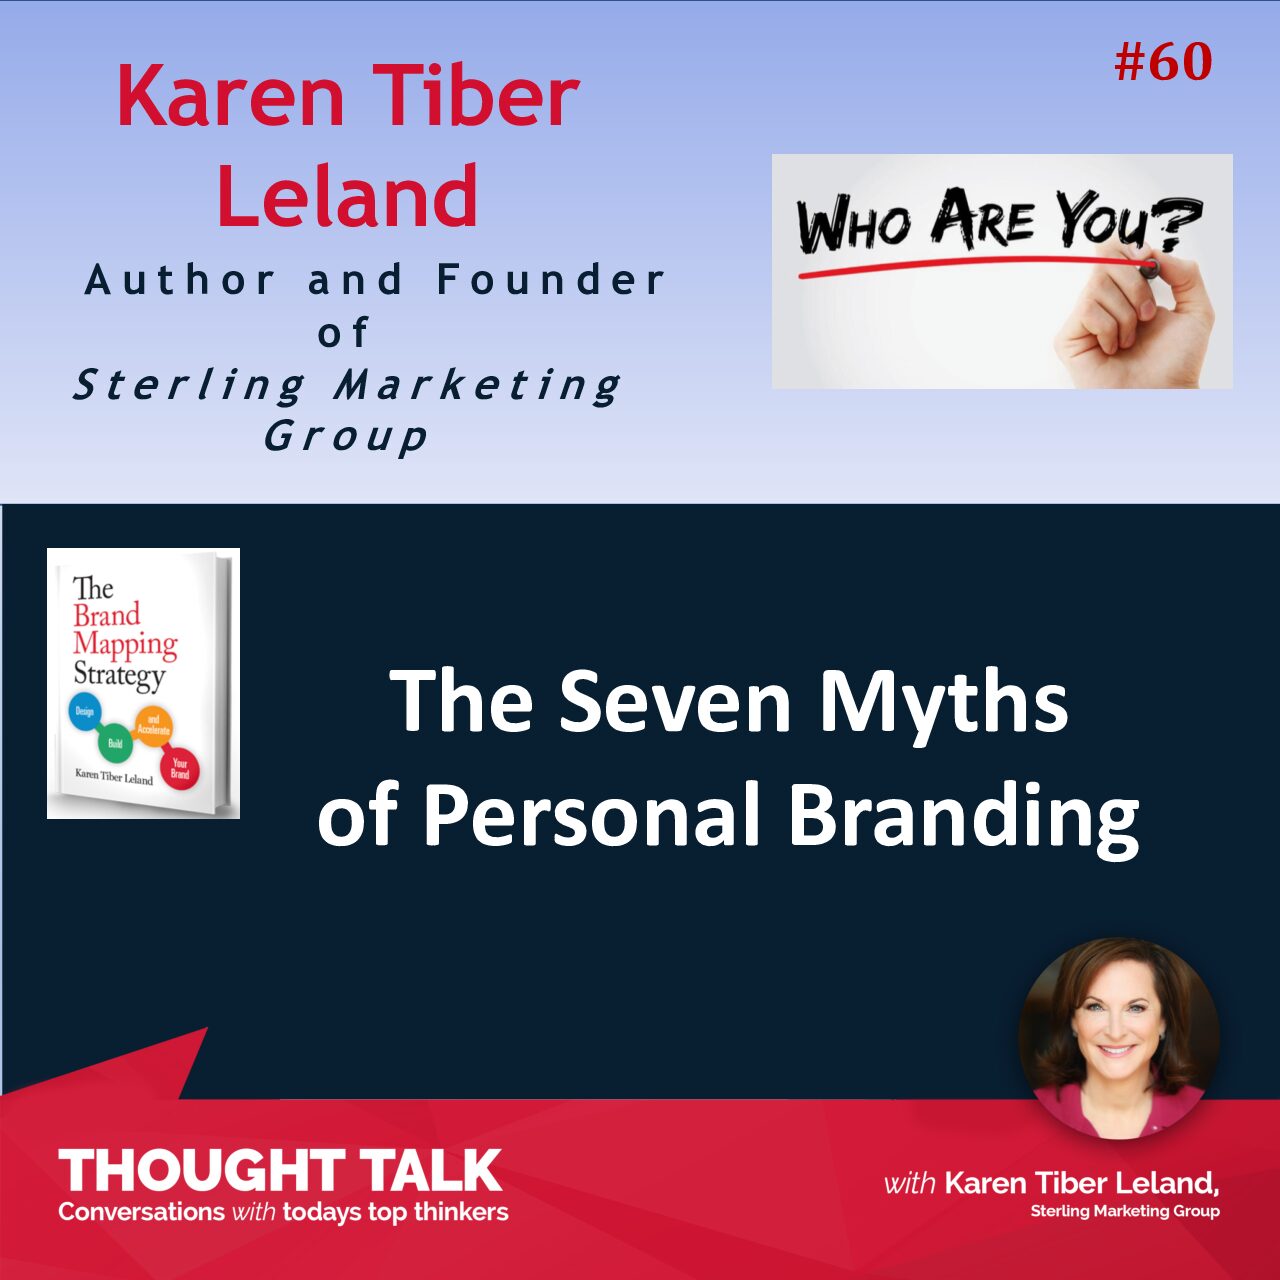 myths of personal branding